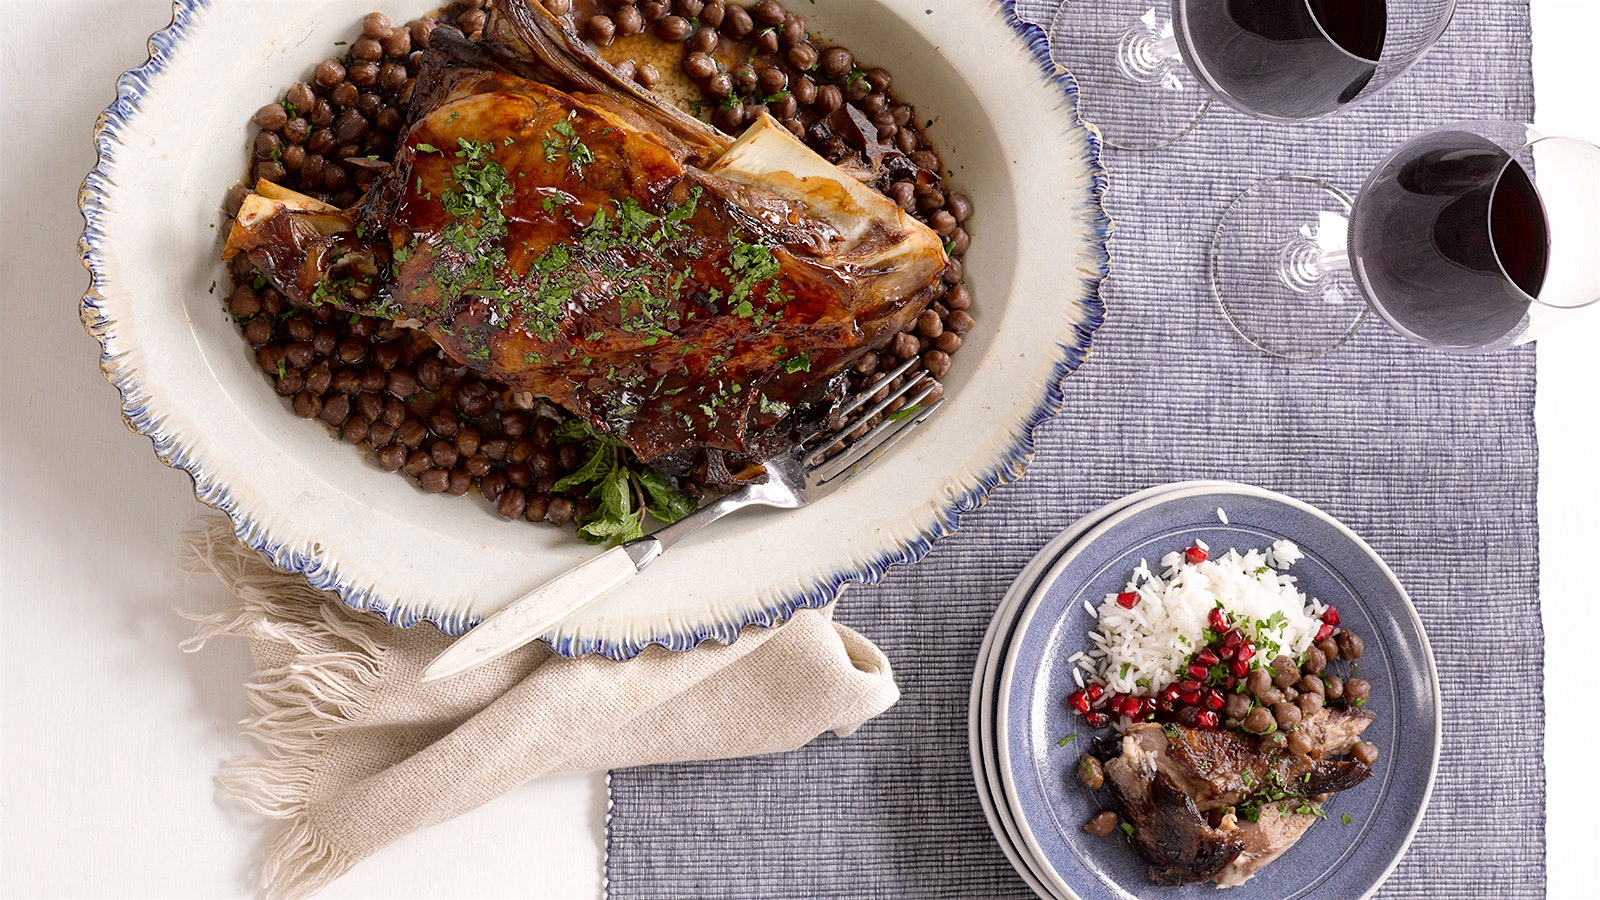  A platter of braised lamb shoulder and chickpeas; a plate with the lamb, rice and pomegranate seed garnish; and two glasses of red wine